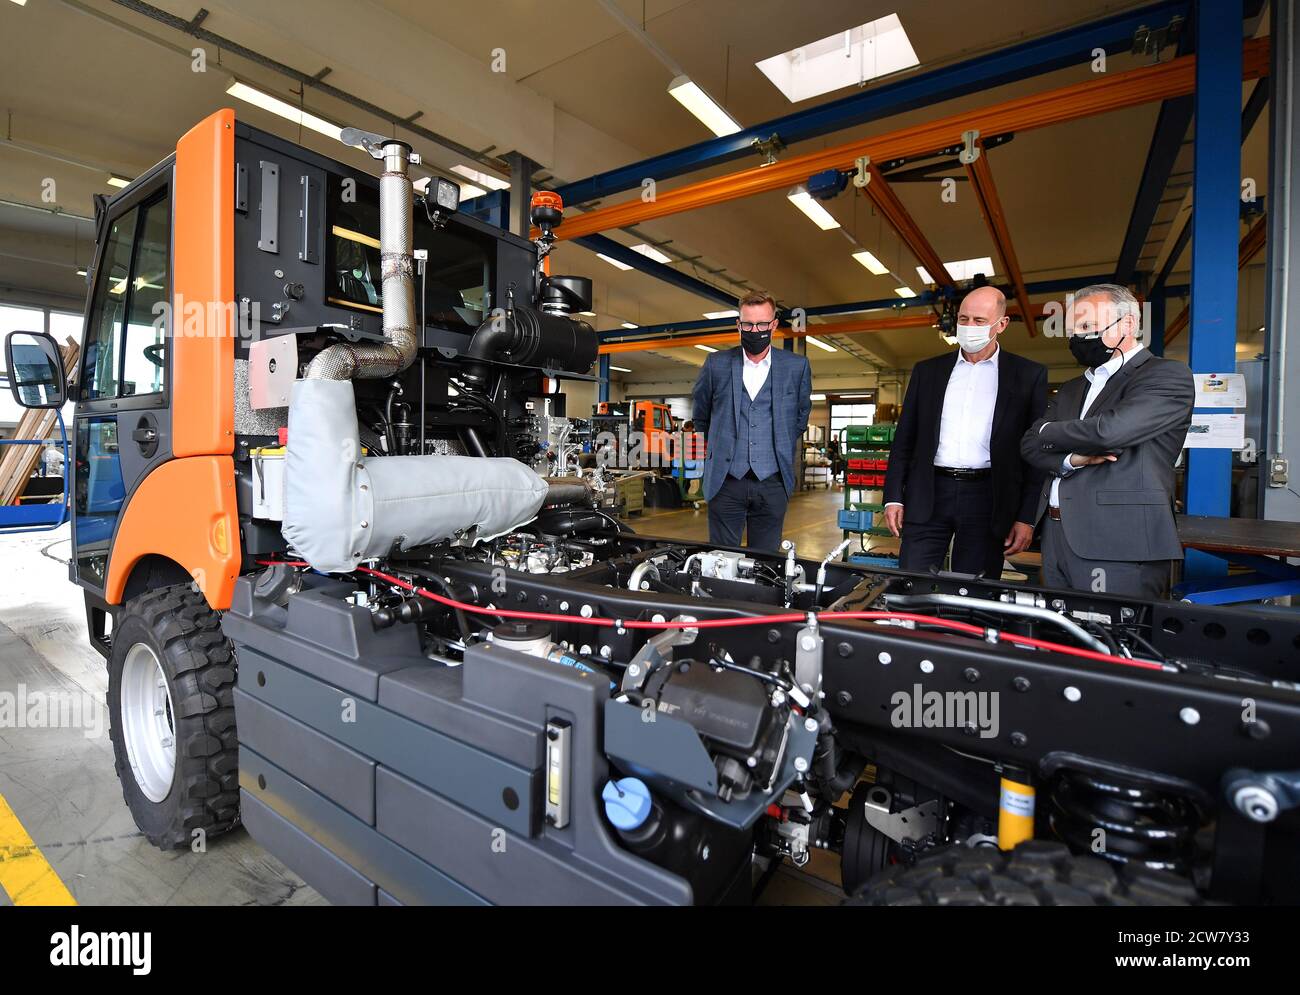 Waltershausen, Germany. 28th Sep, 2020. Ingo Humbach (l-r), plant manager, Wolfgang Tiefensee (SPD), Minister of Economics of Thuringia, and Mario Schreiber, Chairman of the Hako Board of Management, look at a Multicar M31 at the Waltershausen plant of Hako GmbH. Multifunctional load and equipment carriers of the Multicar product line have been manufactured here for over 60 years. According to company information, around 150 employees and 13 trainees work at the Waltershausen site. The Hako Group has its headquarters in Bad Oldesloe. Credit: Martin Schutt/dpa-Zentralbild/dpa/Alamy Live News Stock Photo